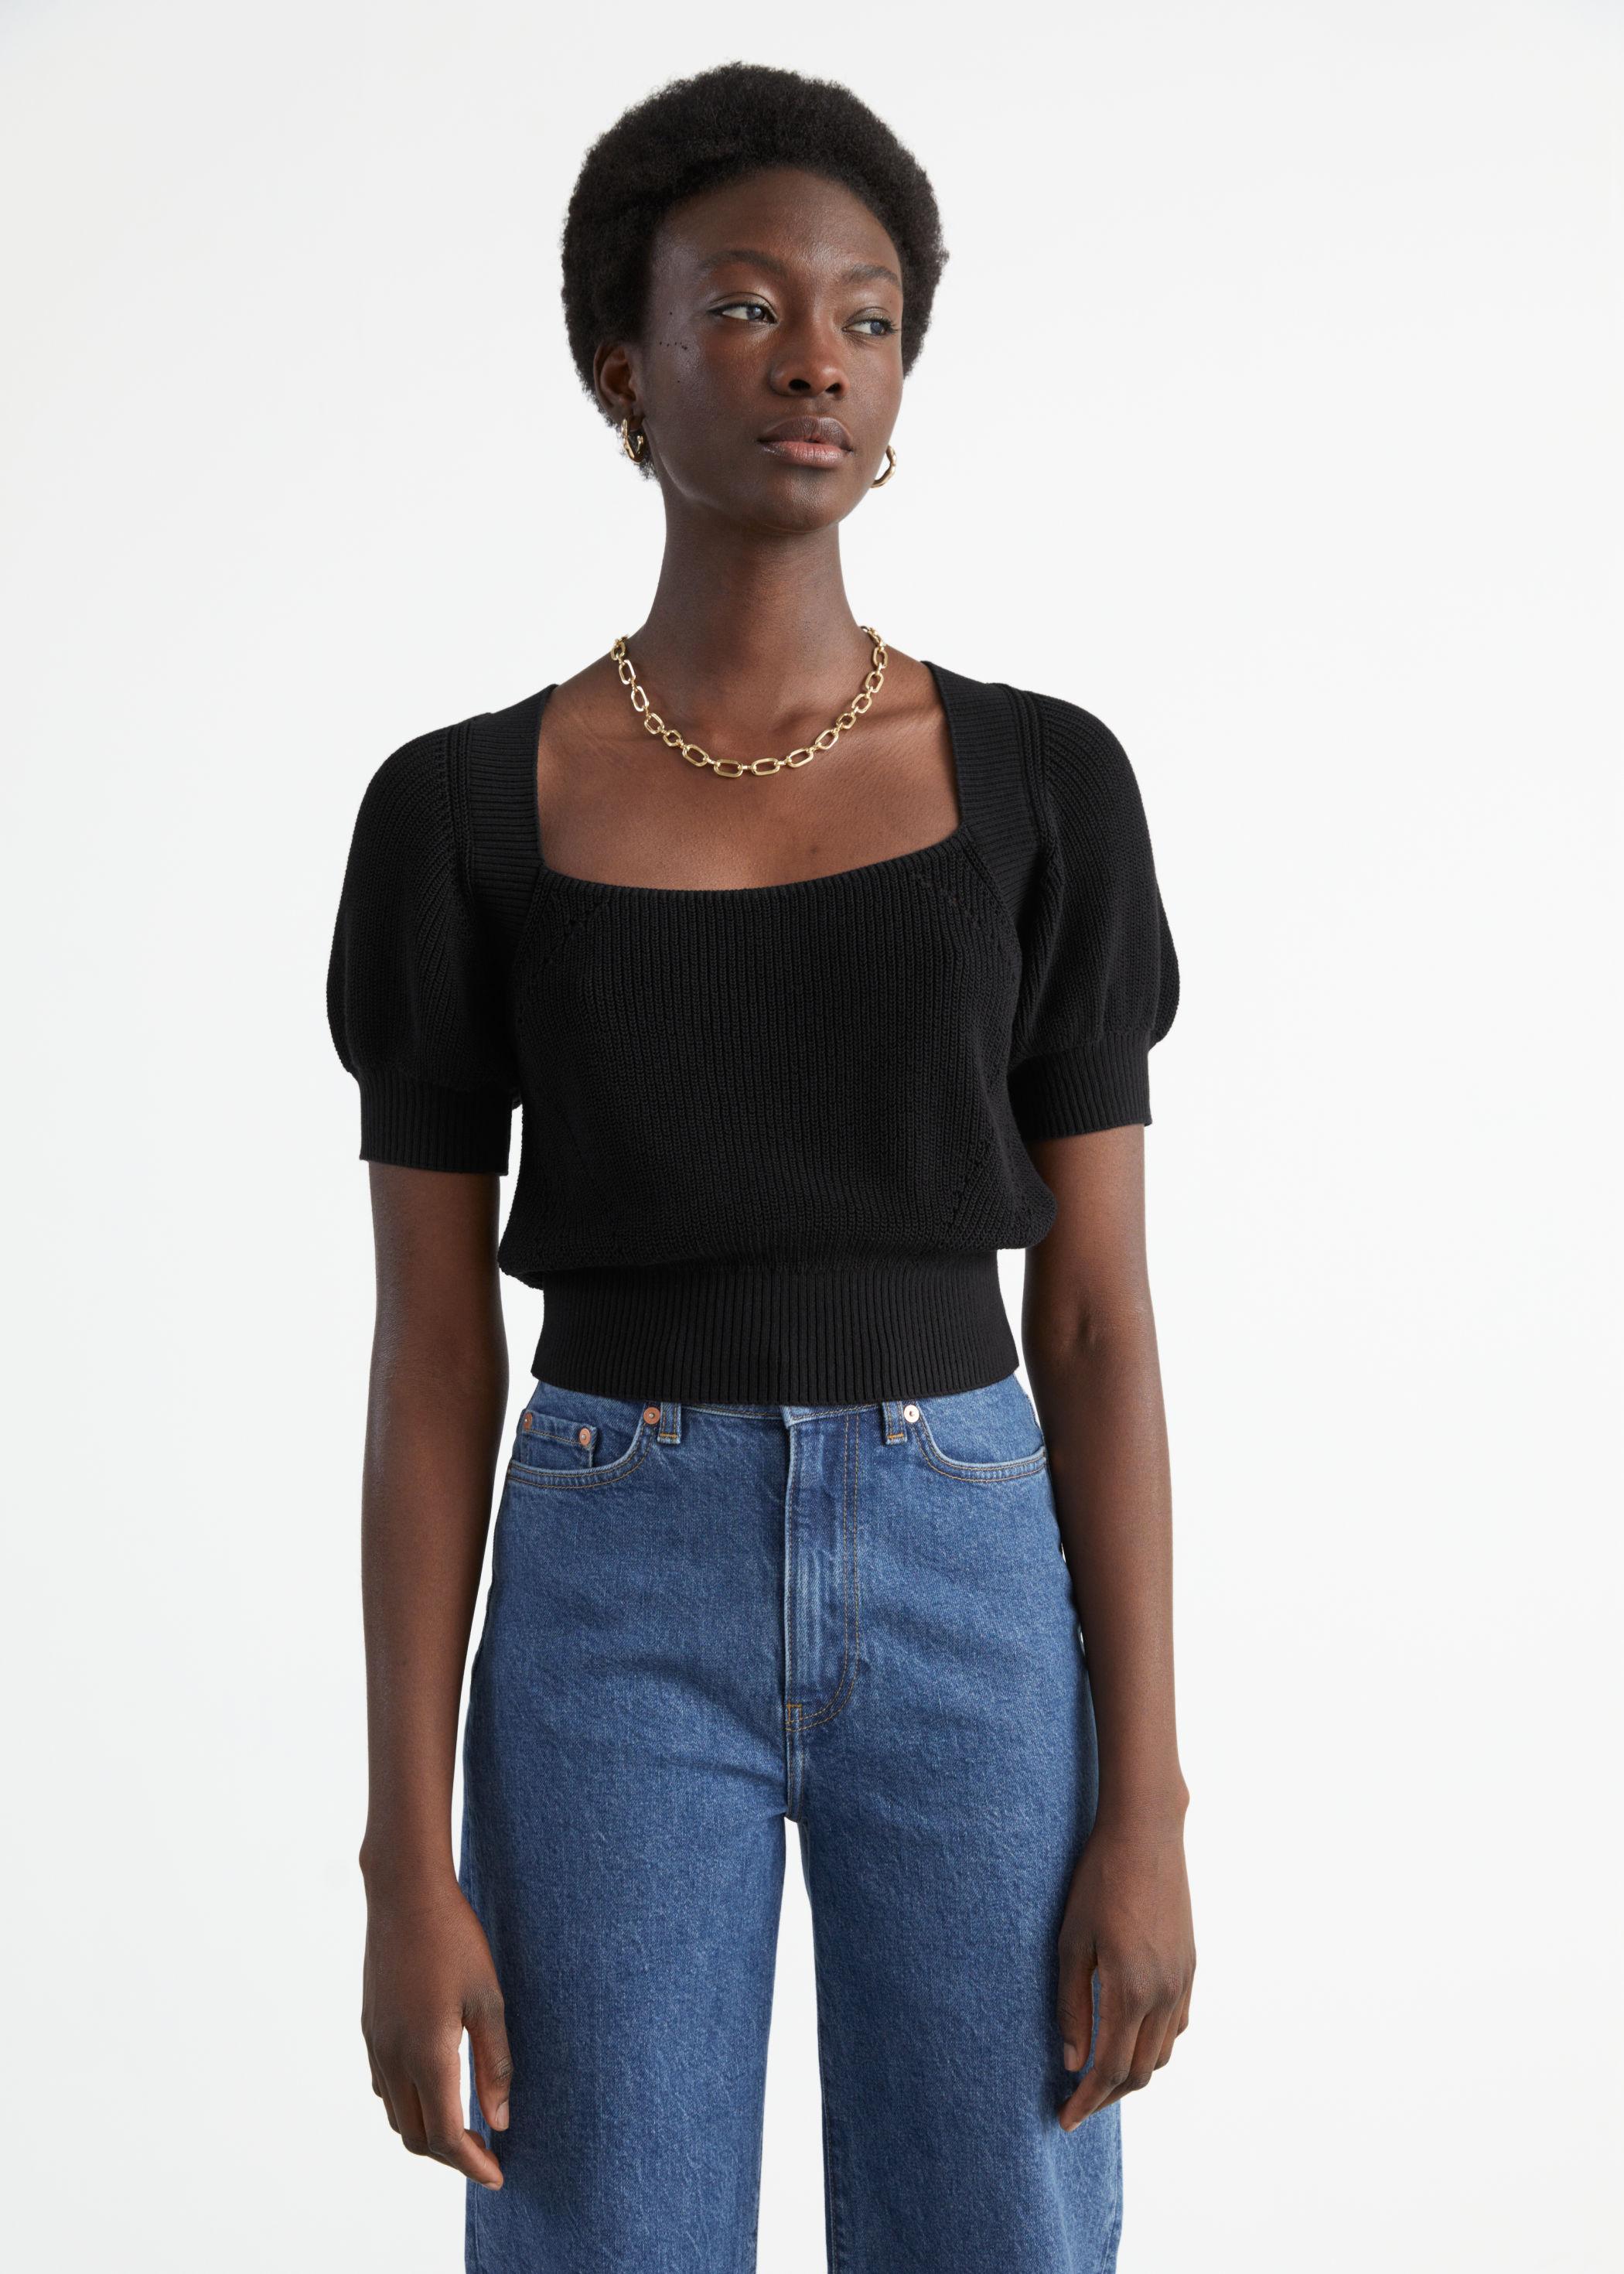 & Other Stories Puff Sleeve Cut-out Sweater in Black | Lyst